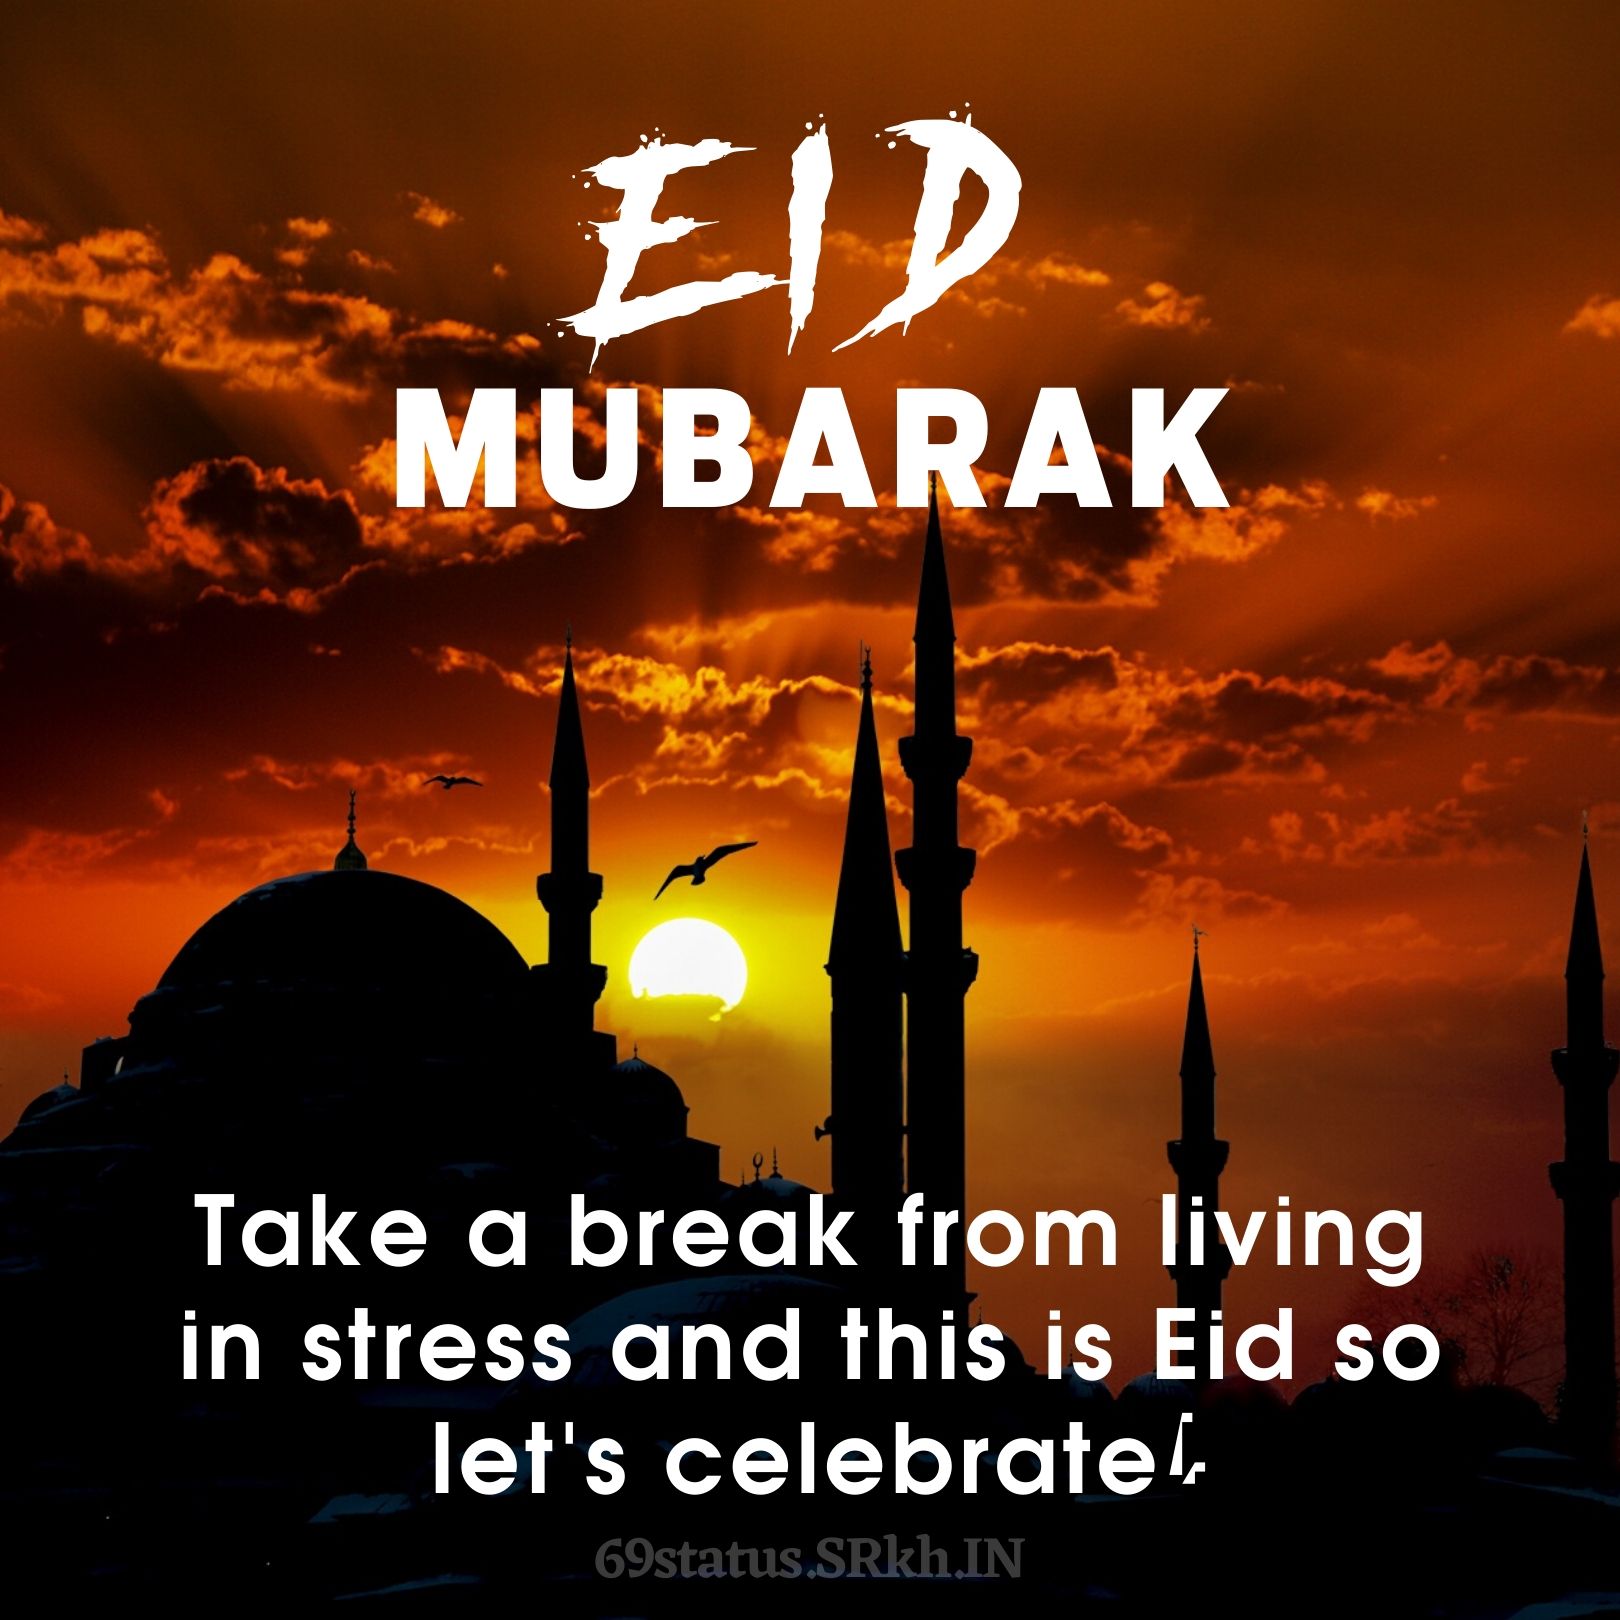 Eid Mubarak. Take a break from living in stress and this is Eid So lets celebrate